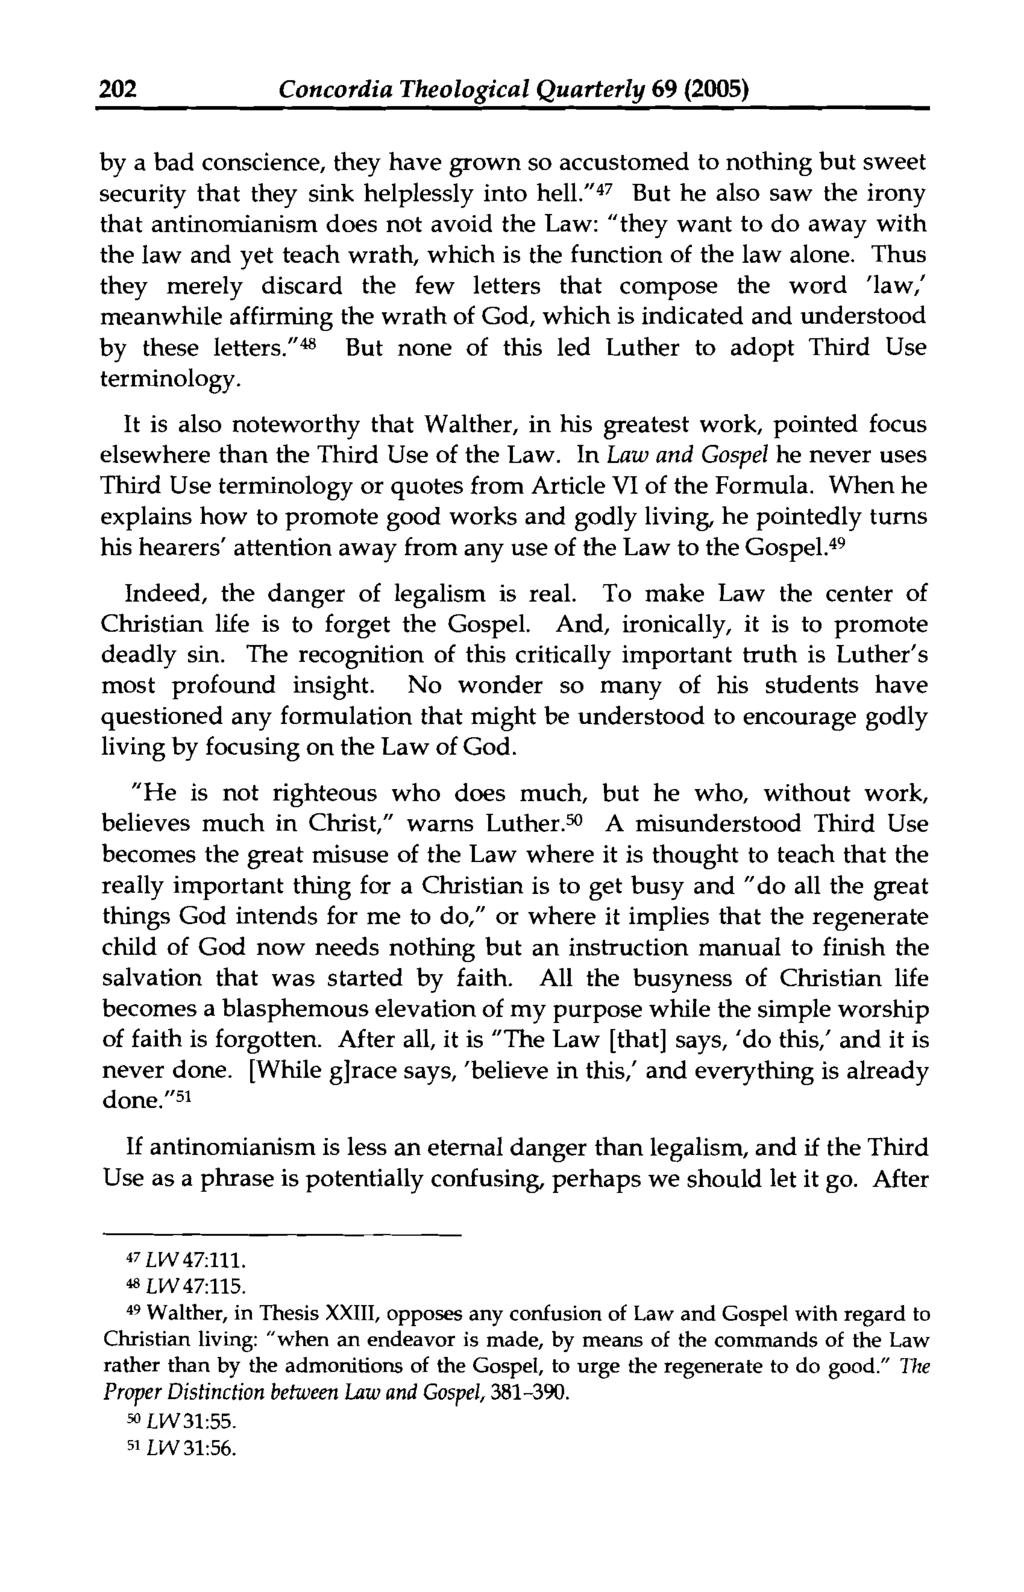 202 Concordia Theological Quarterly 69 (2005) by a bad conscience, they have grown so accustomed to nothing but sweet security that they sink helplessly into he11.